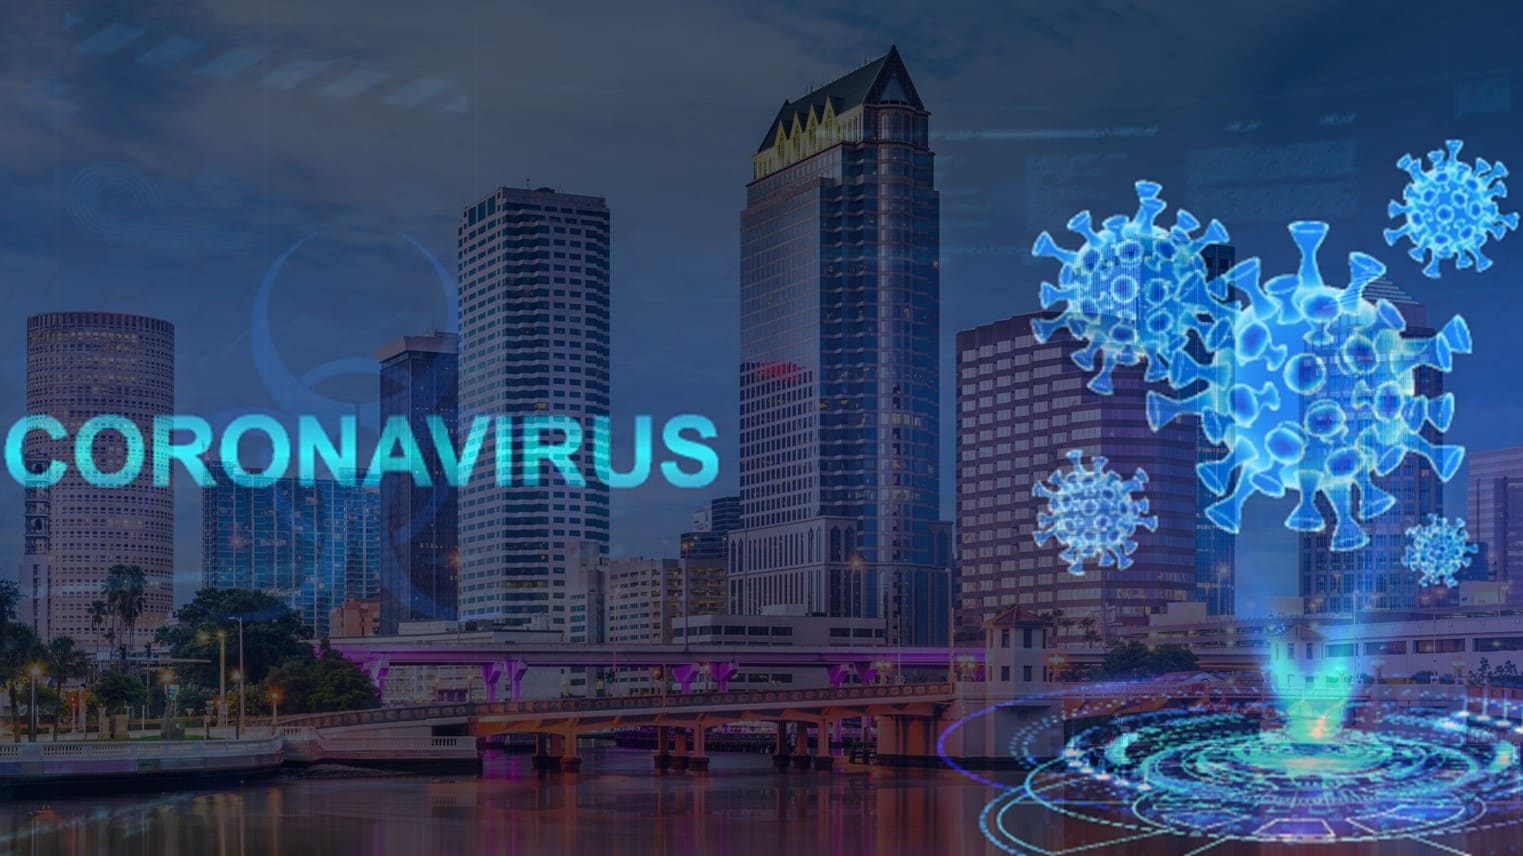 Tampa Bay Commercial Buildings and Coronavirus